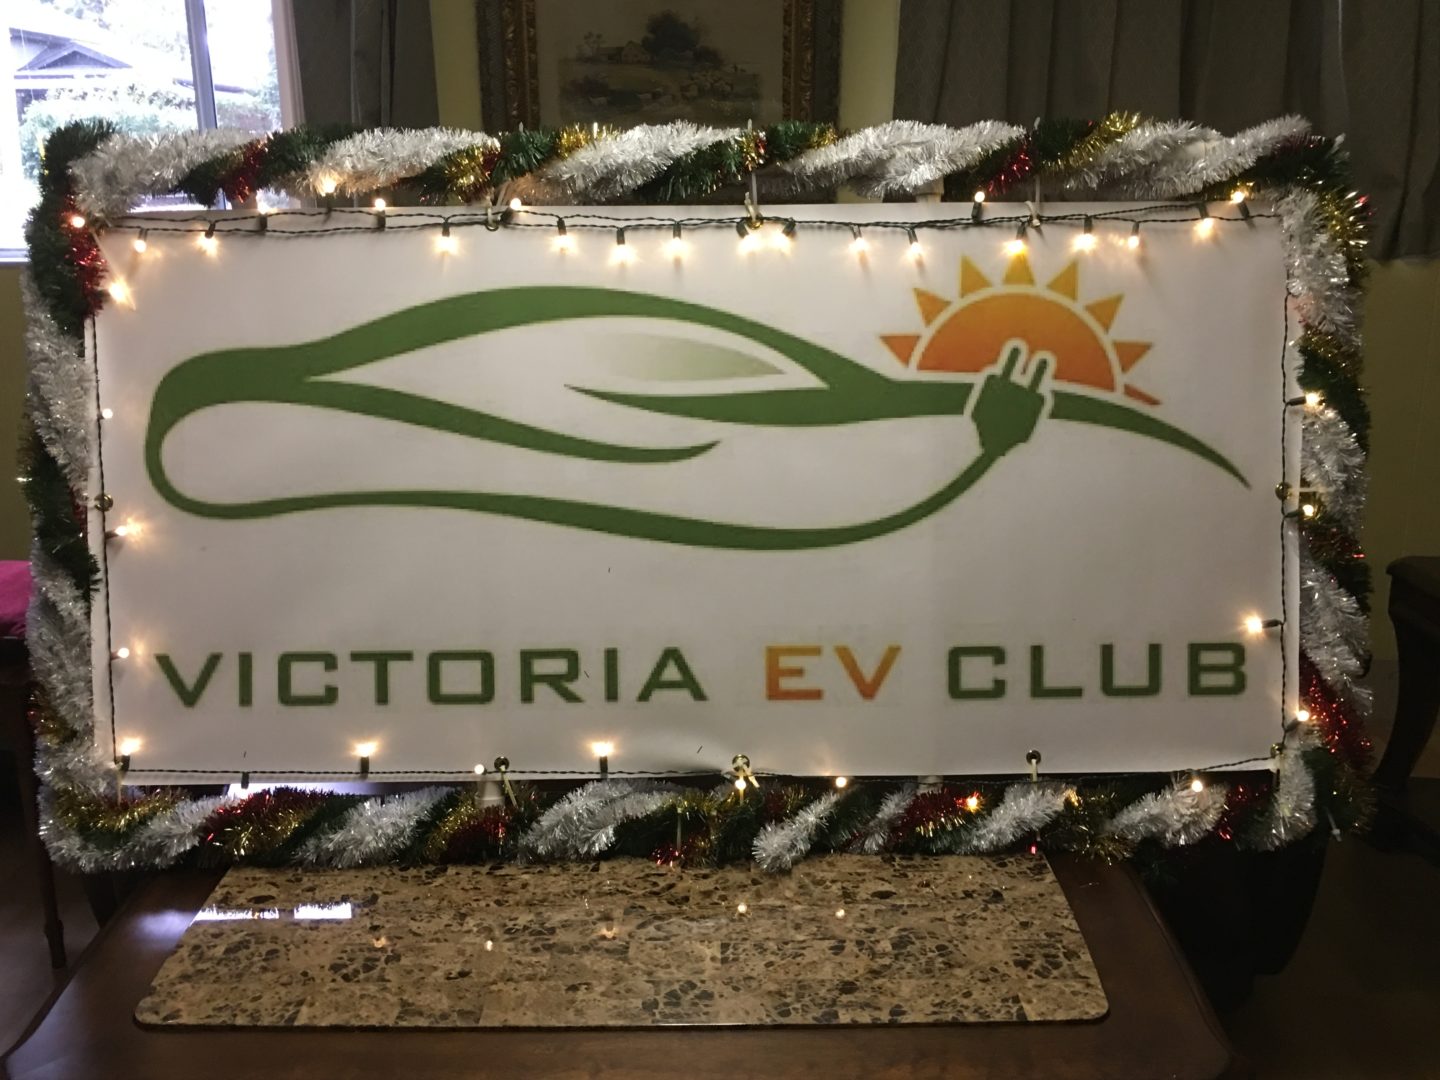 Watch For VEVC’s Entry In Saturday’s Santa Parade